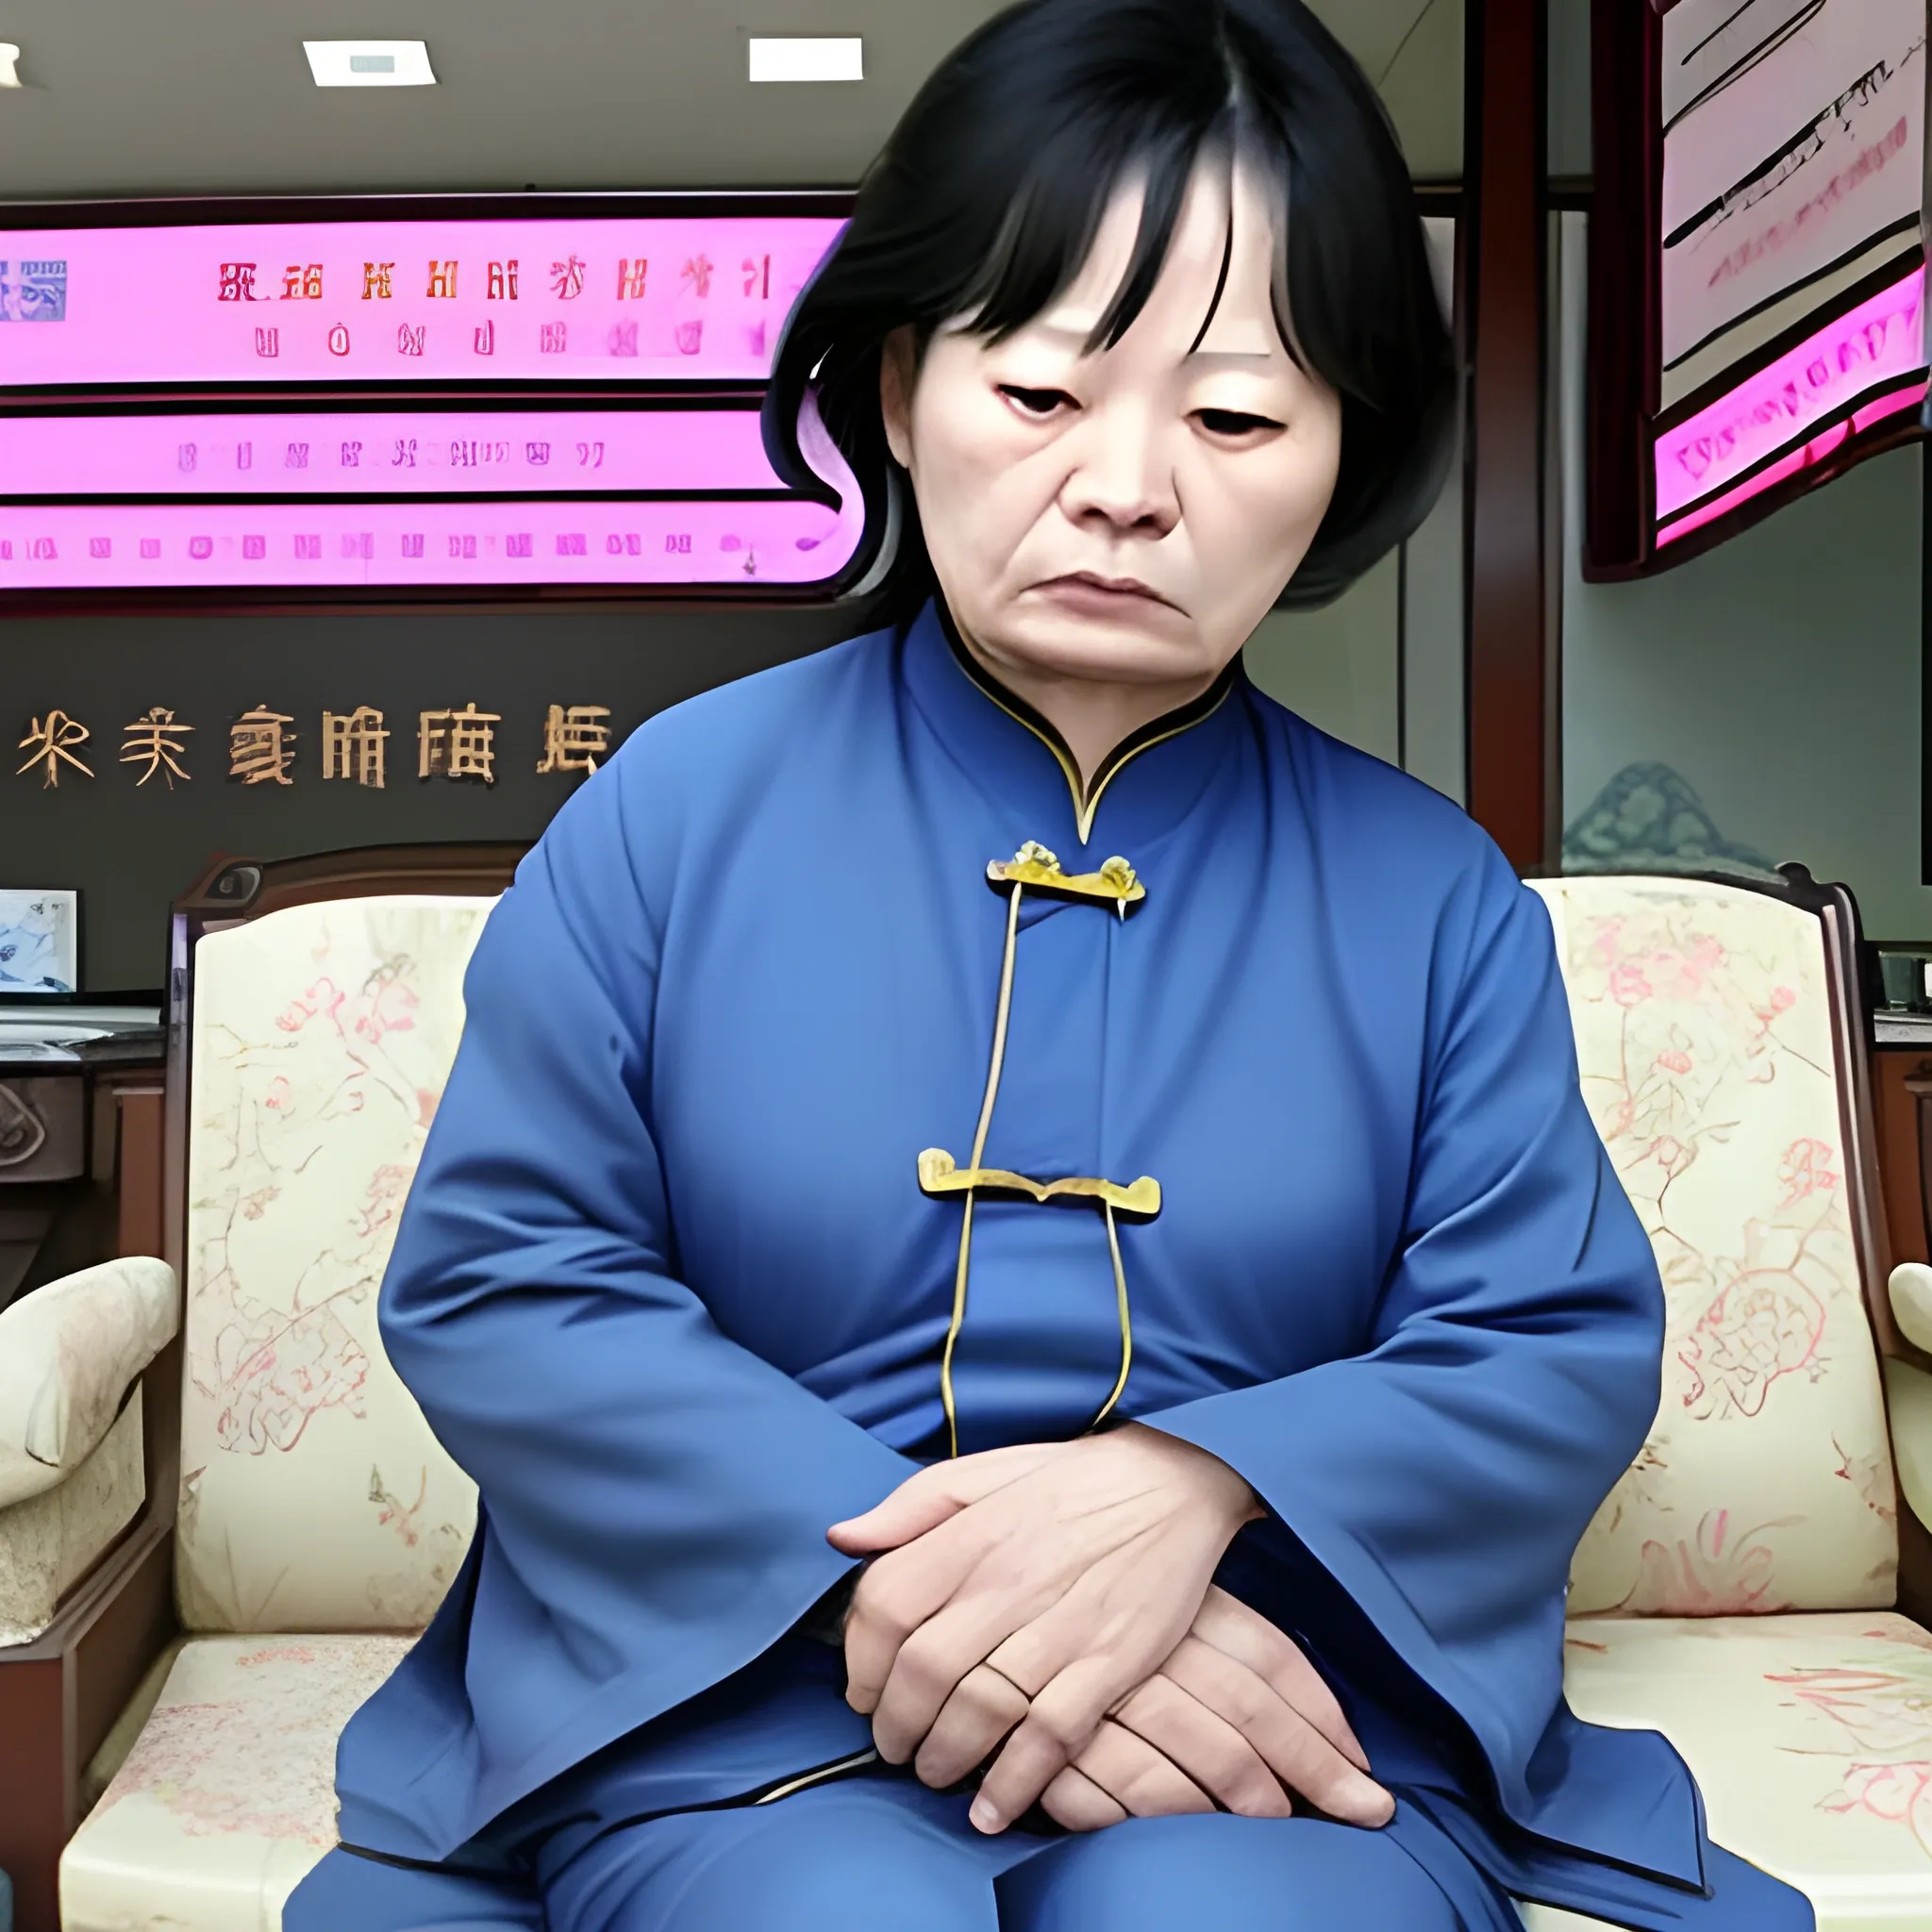 A middle-aged Chinese woman fell victim to deception.